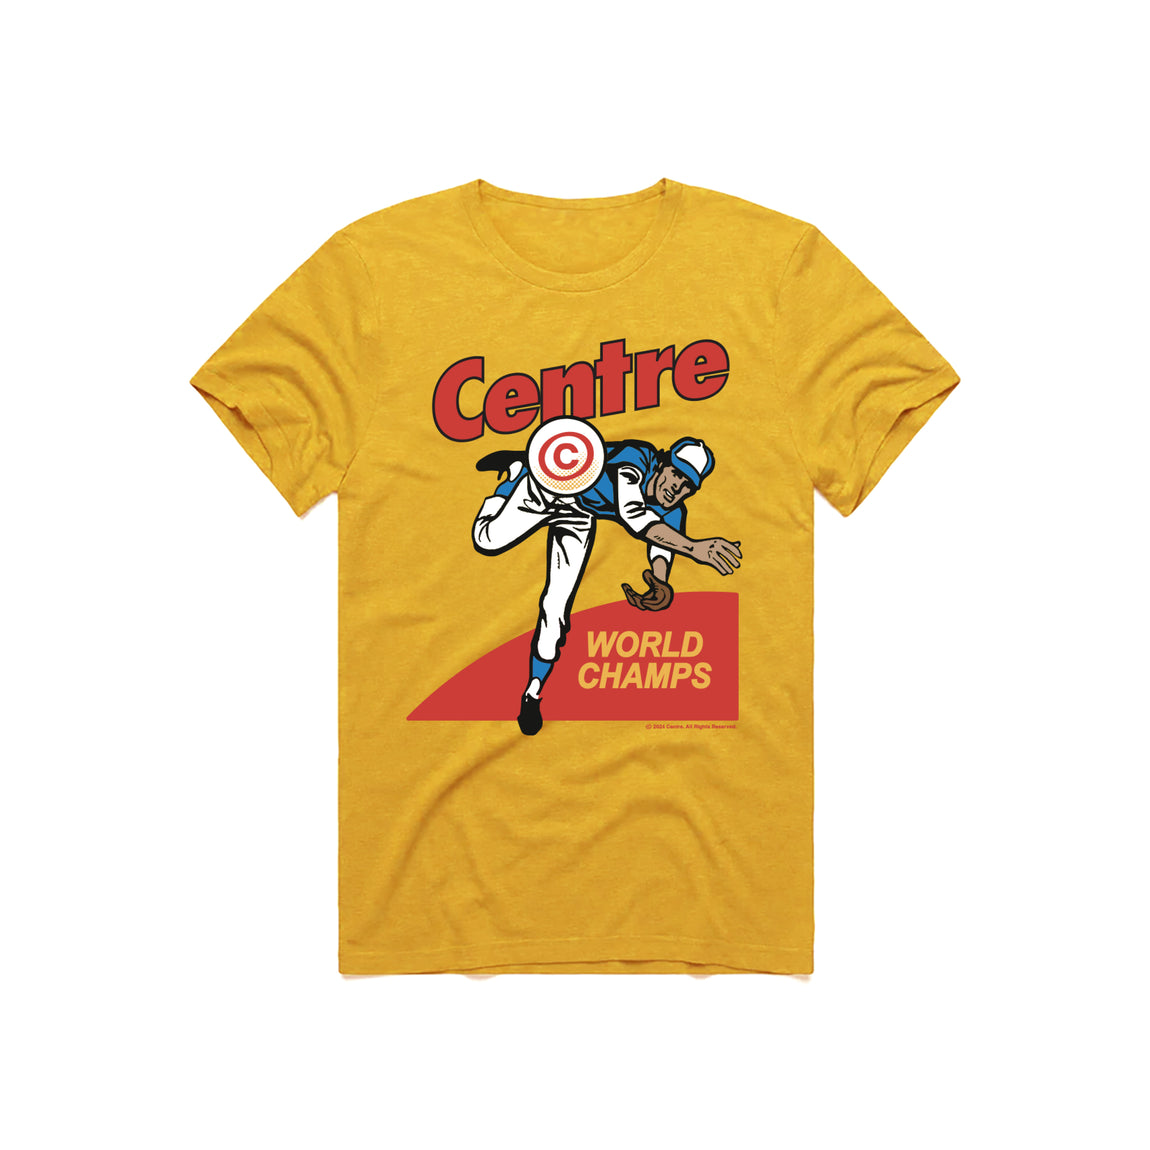 Centre Pitch Tee (Heather Yellow) - Centre Pitch Tee (Heather Yellow) - 